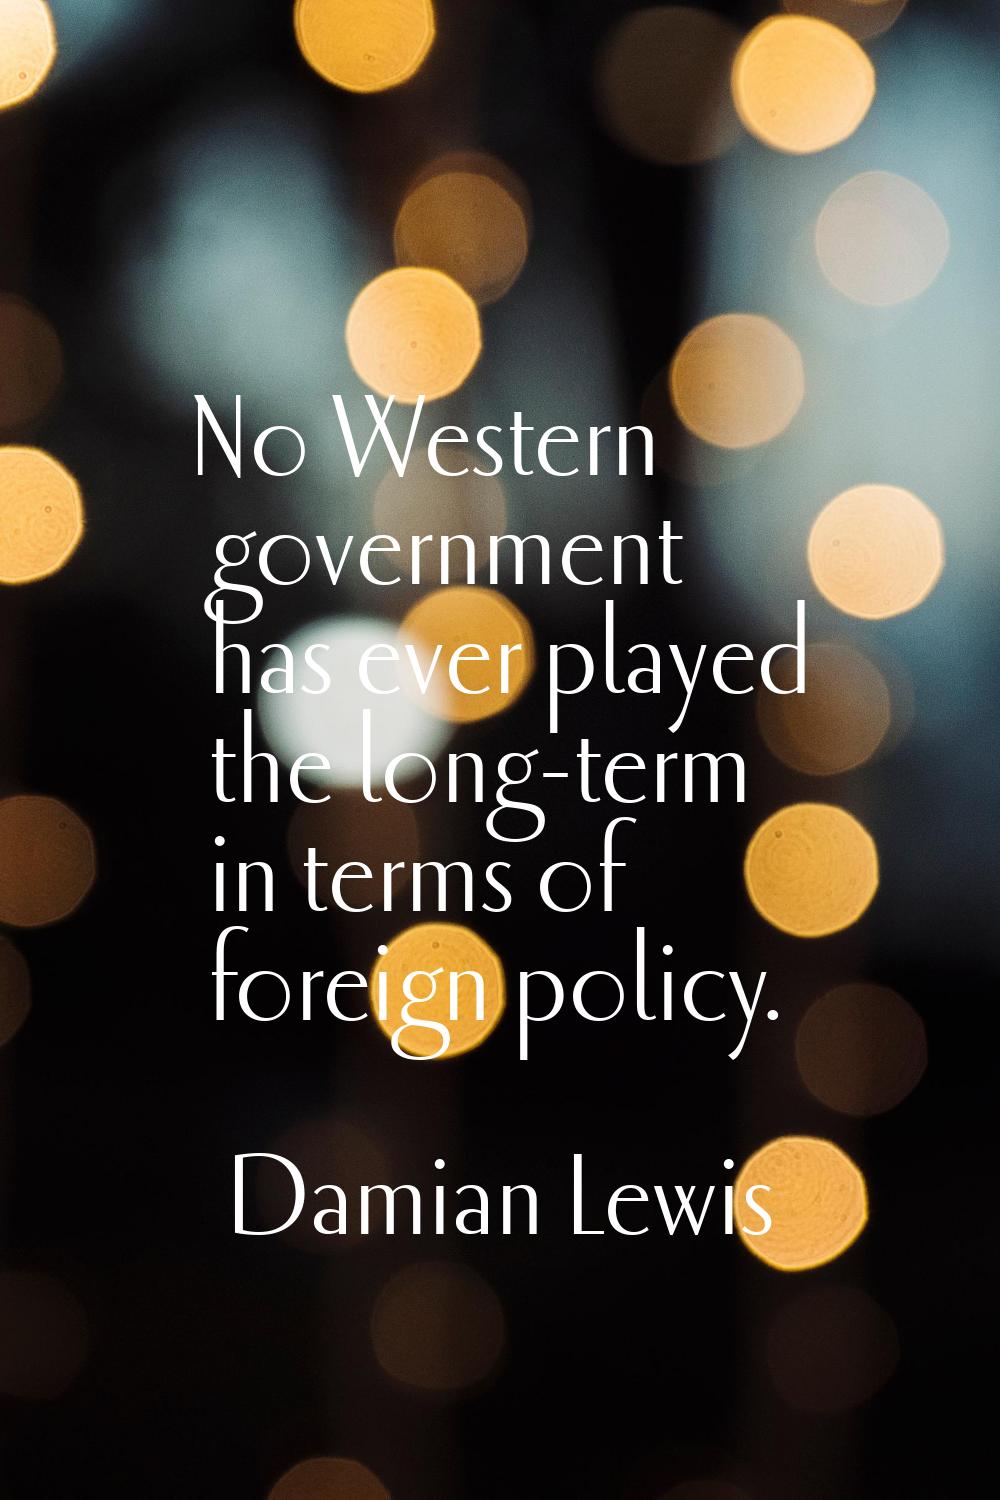 No Western government has ever played the long-term in terms of foreign policy.